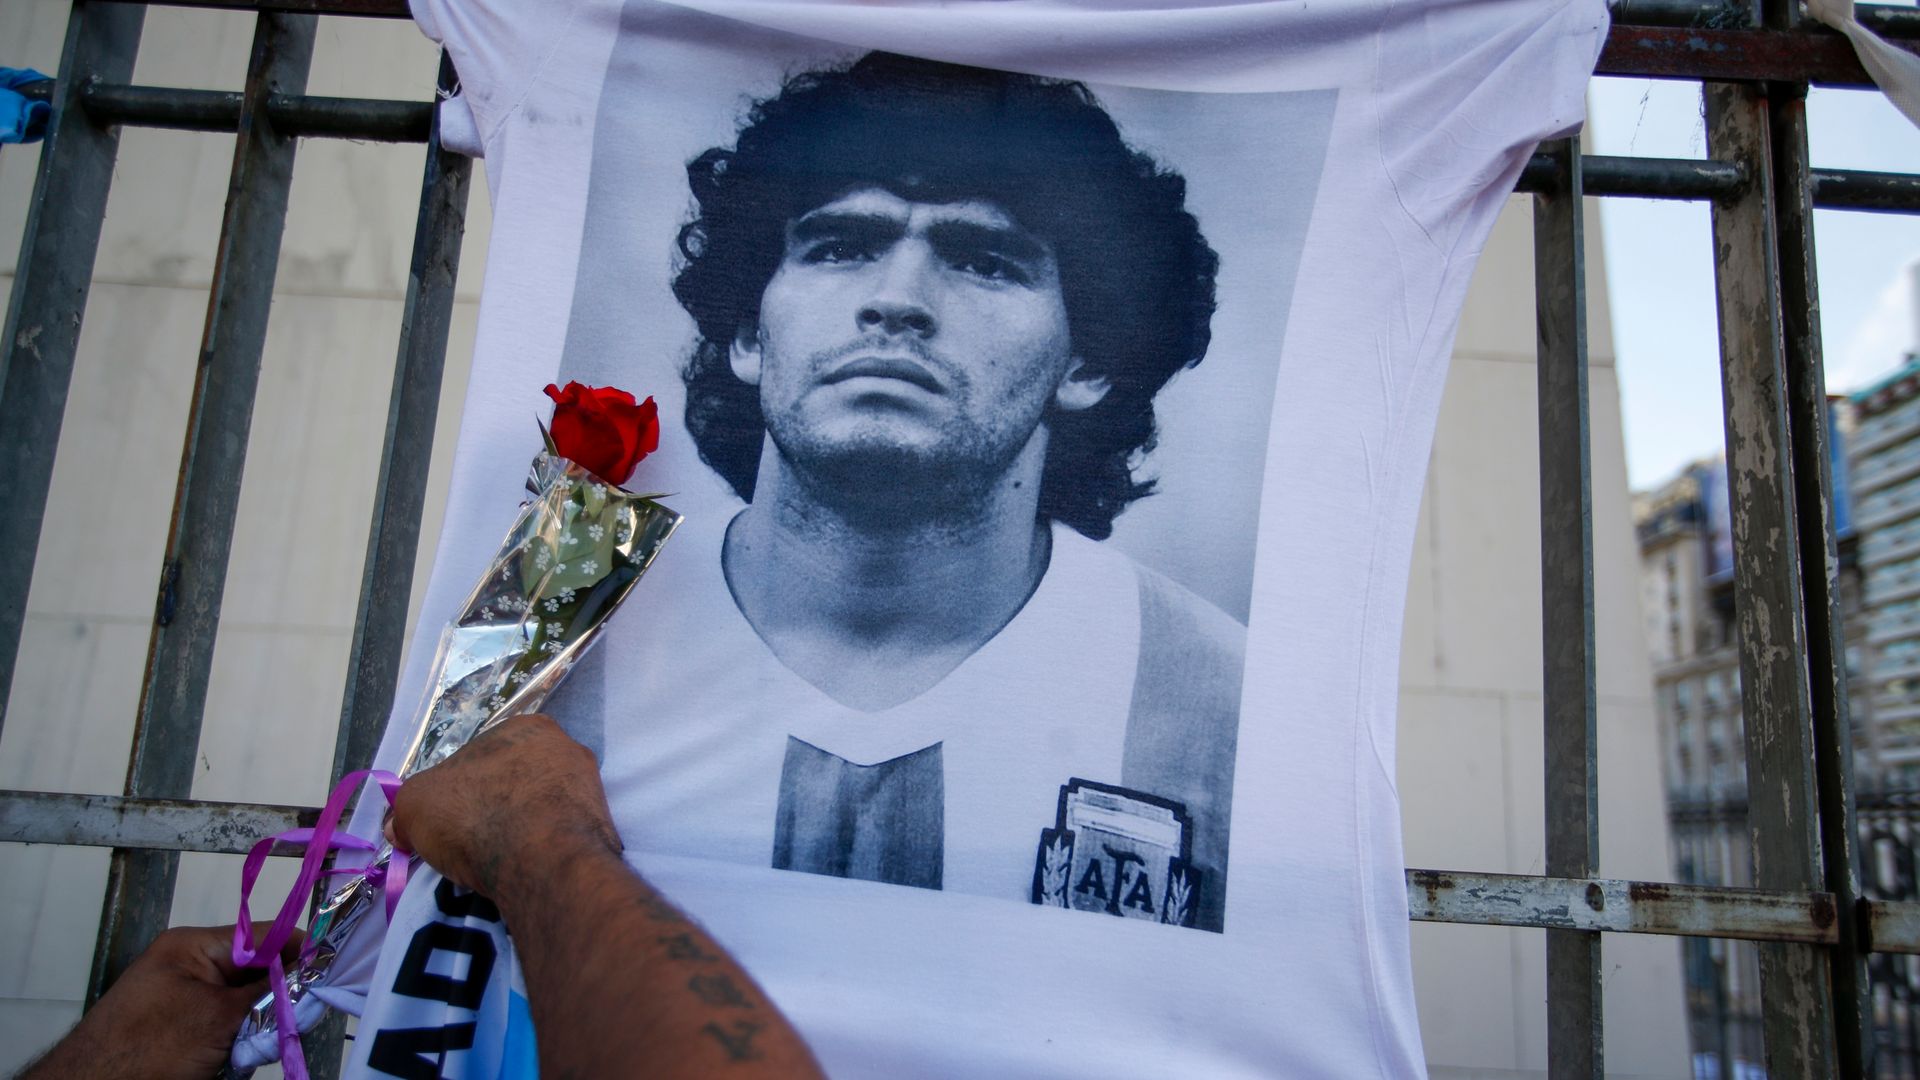 Eight medical staff face homicide charges over Maradona death